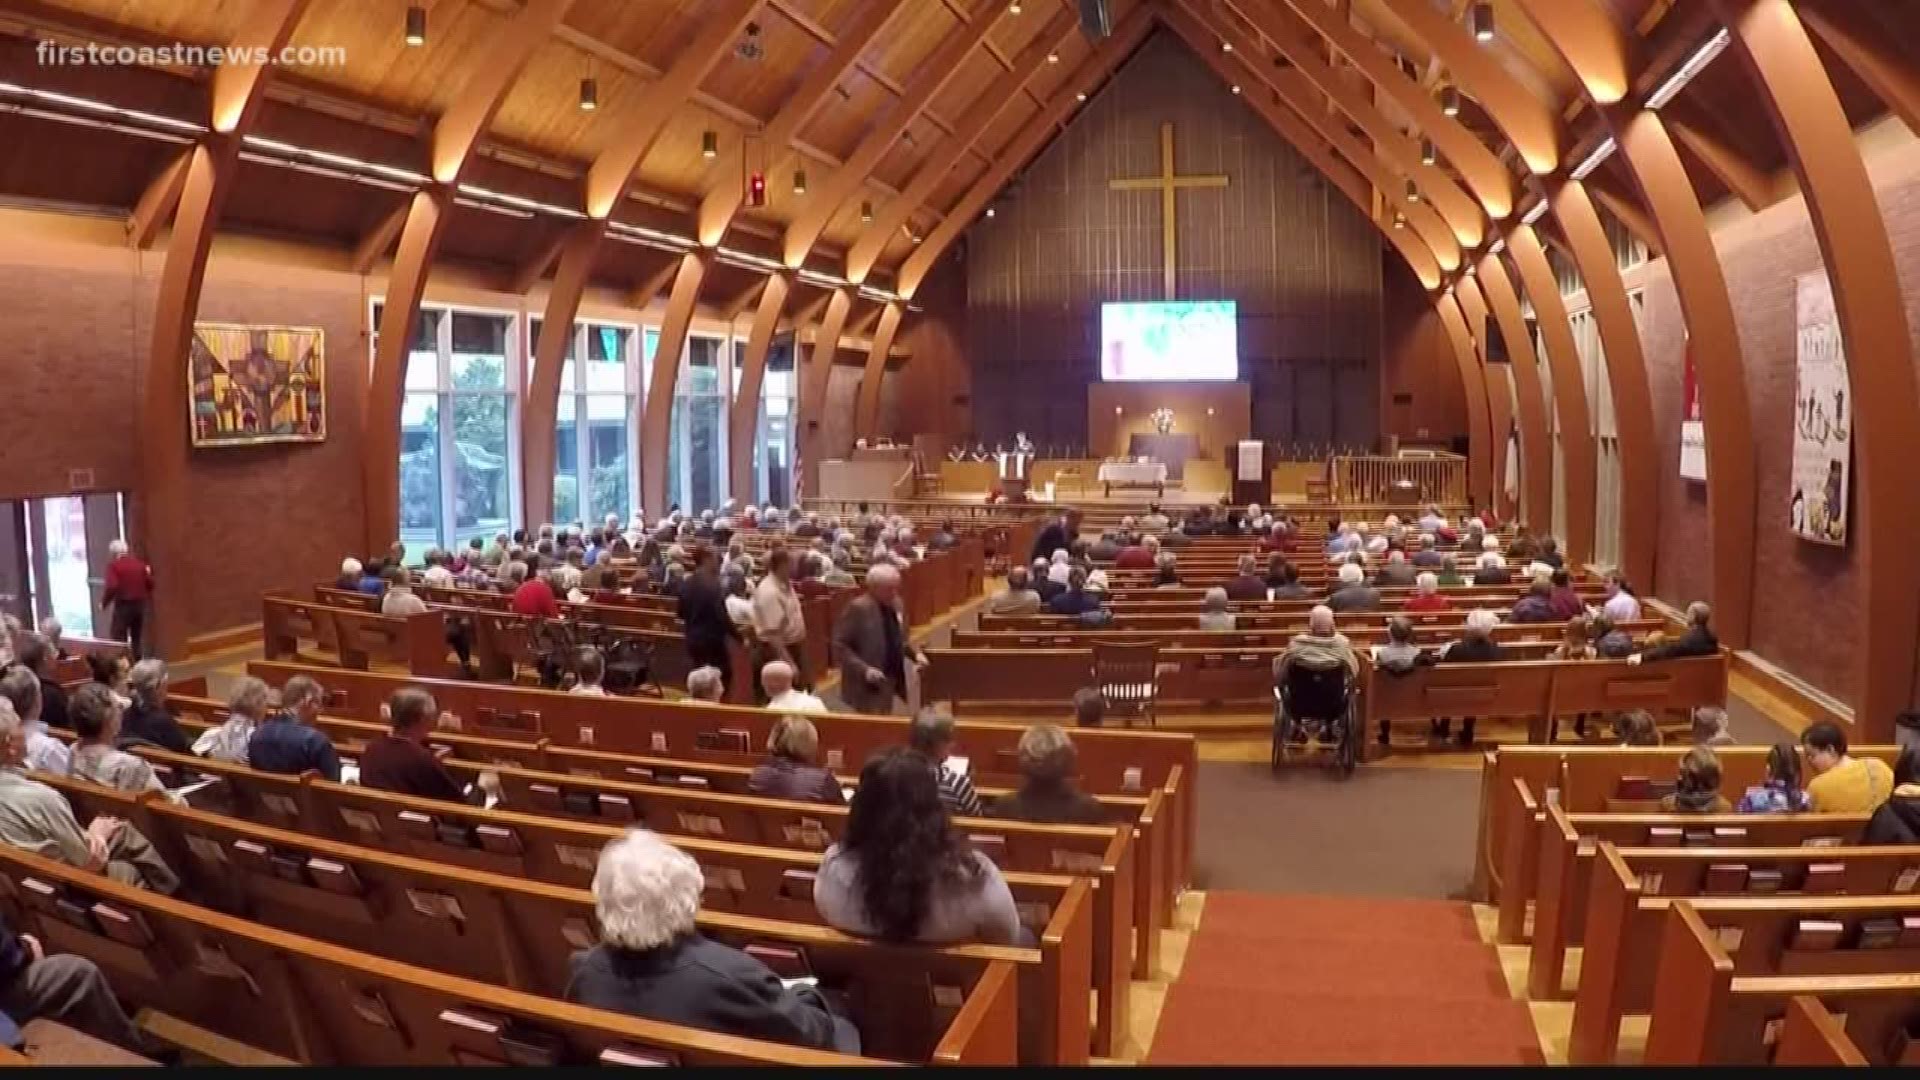 Last Friday the United Methodist Church announced a proposal to officially split the church due to disagreements over same-sex marriage and LGBTQ clergy.